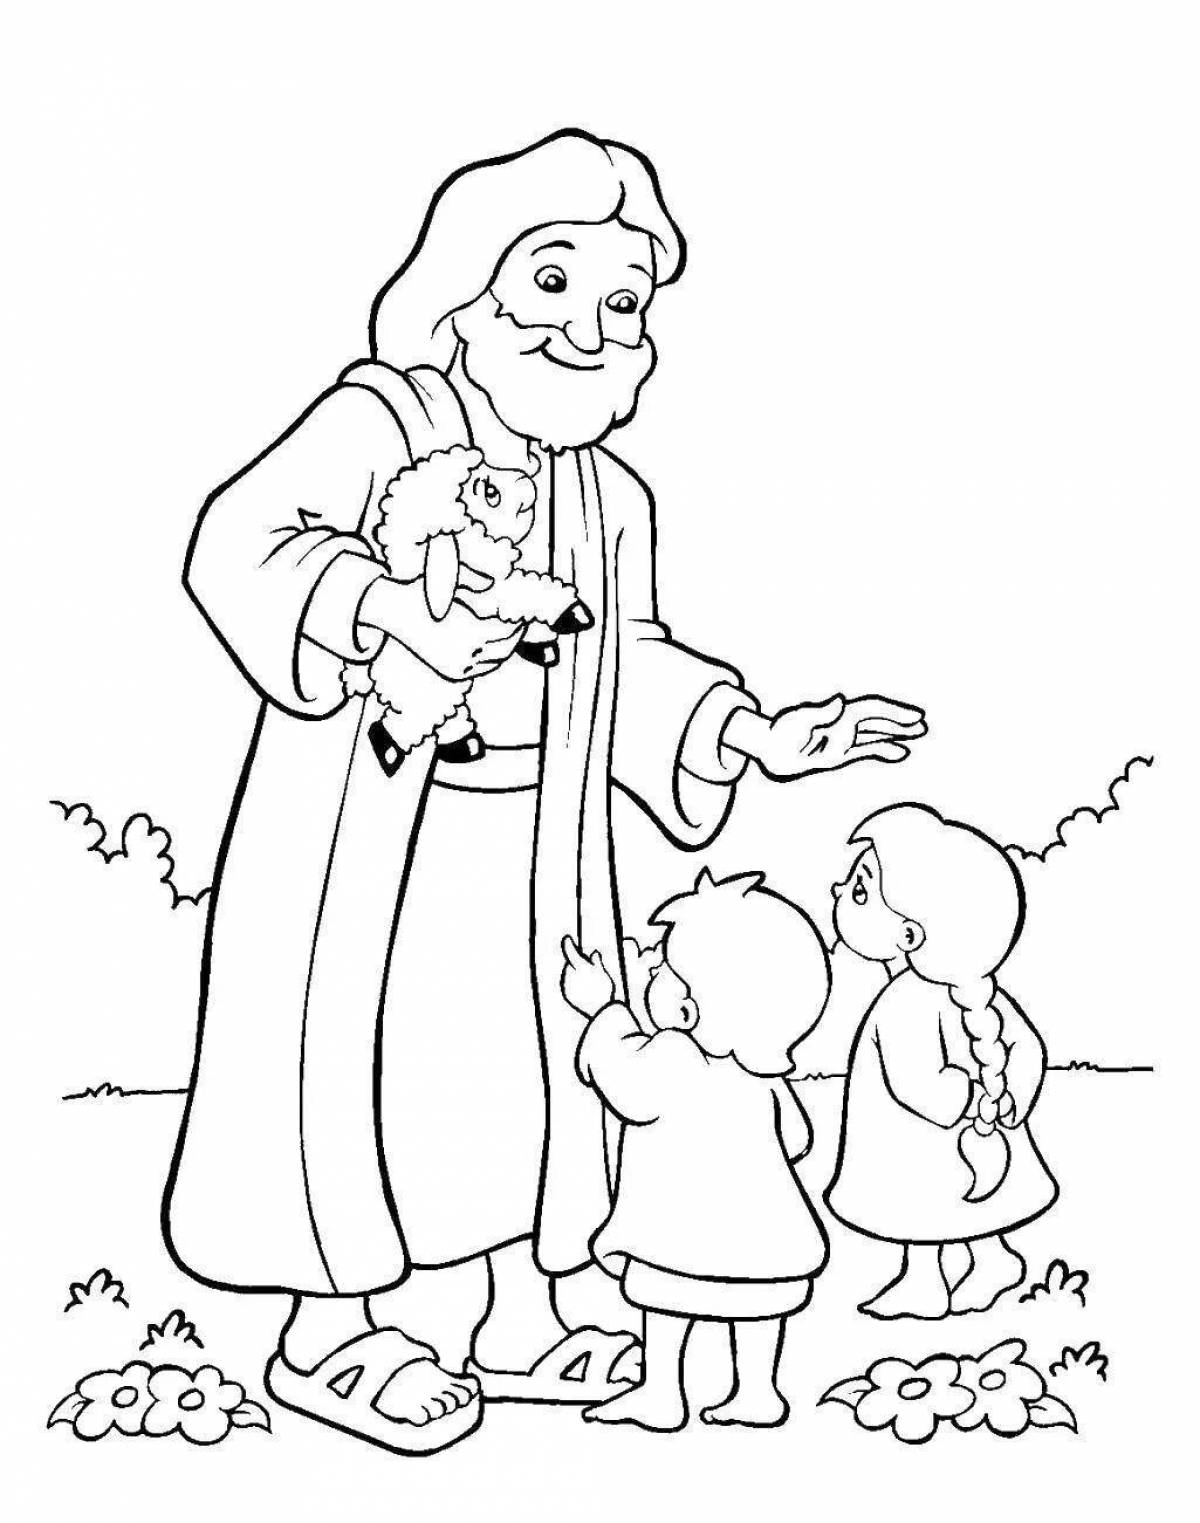 Bright Christian coloring book for kids